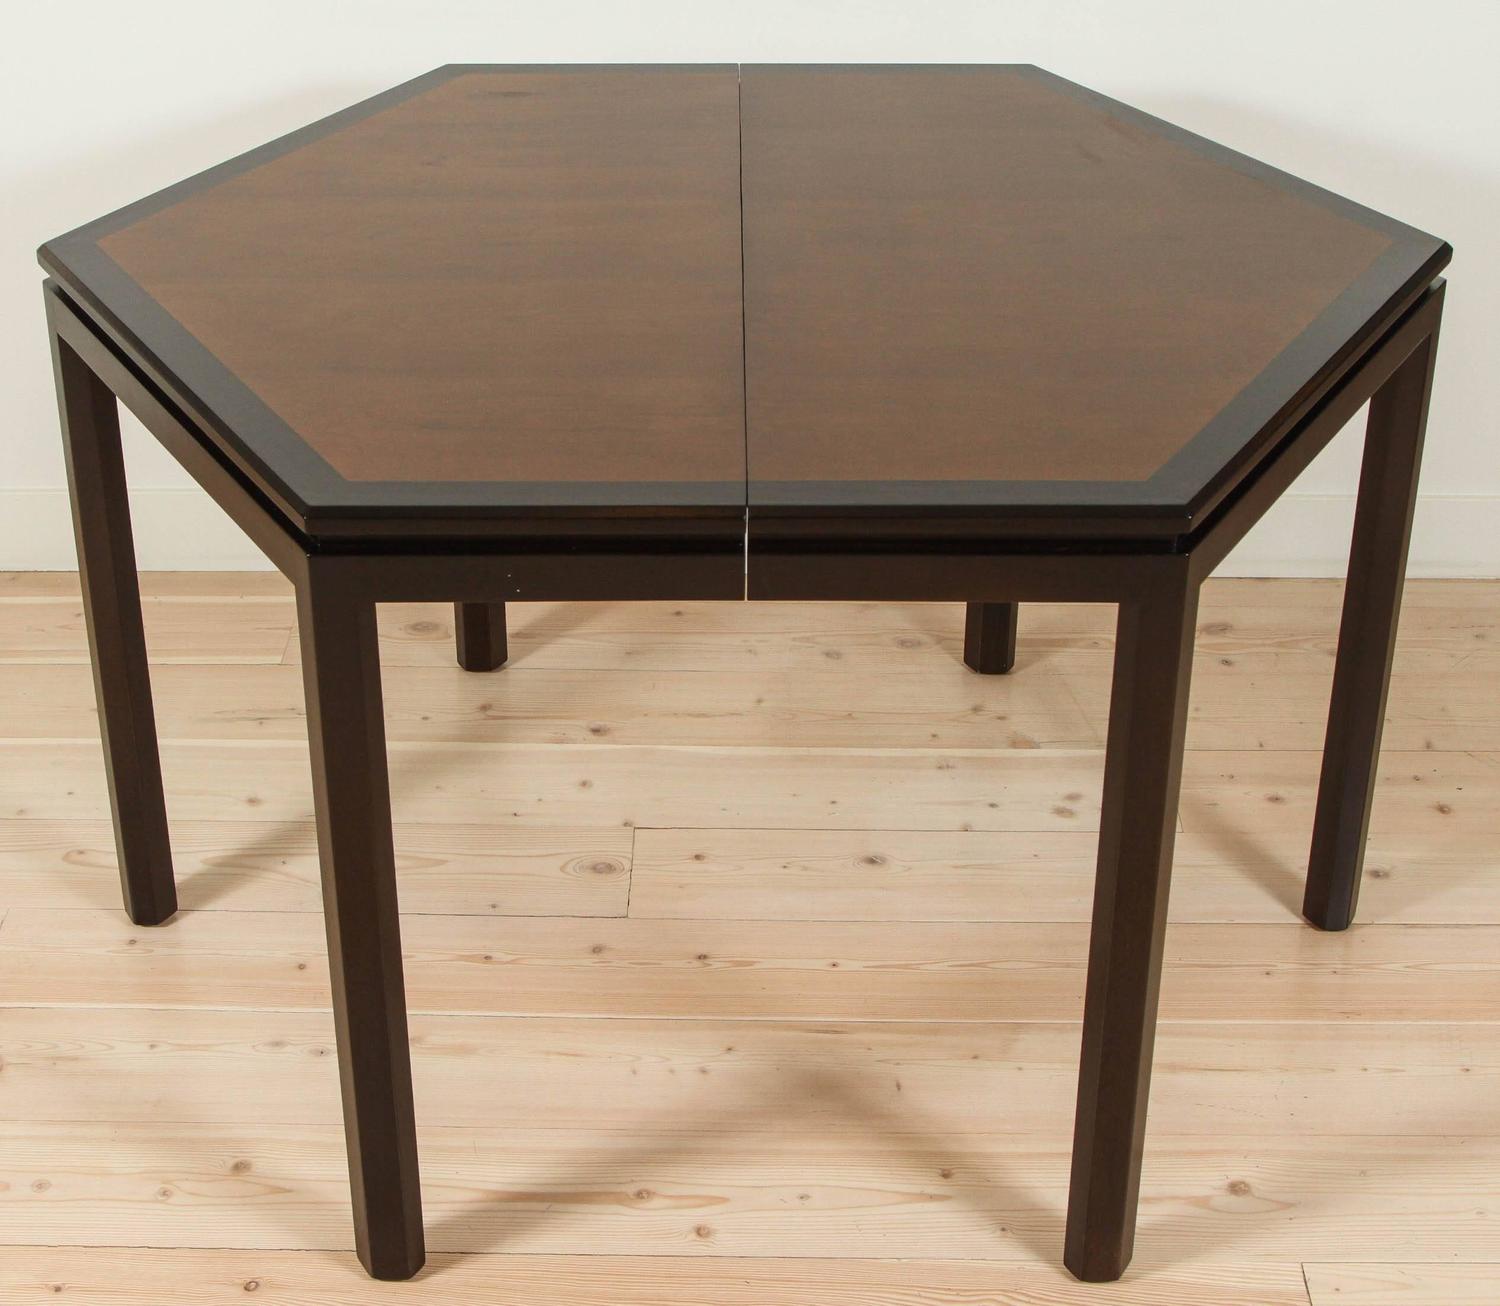 Hexagonal Dining Table by Edward Wormley for Dunbar For Sale at 1stdibs